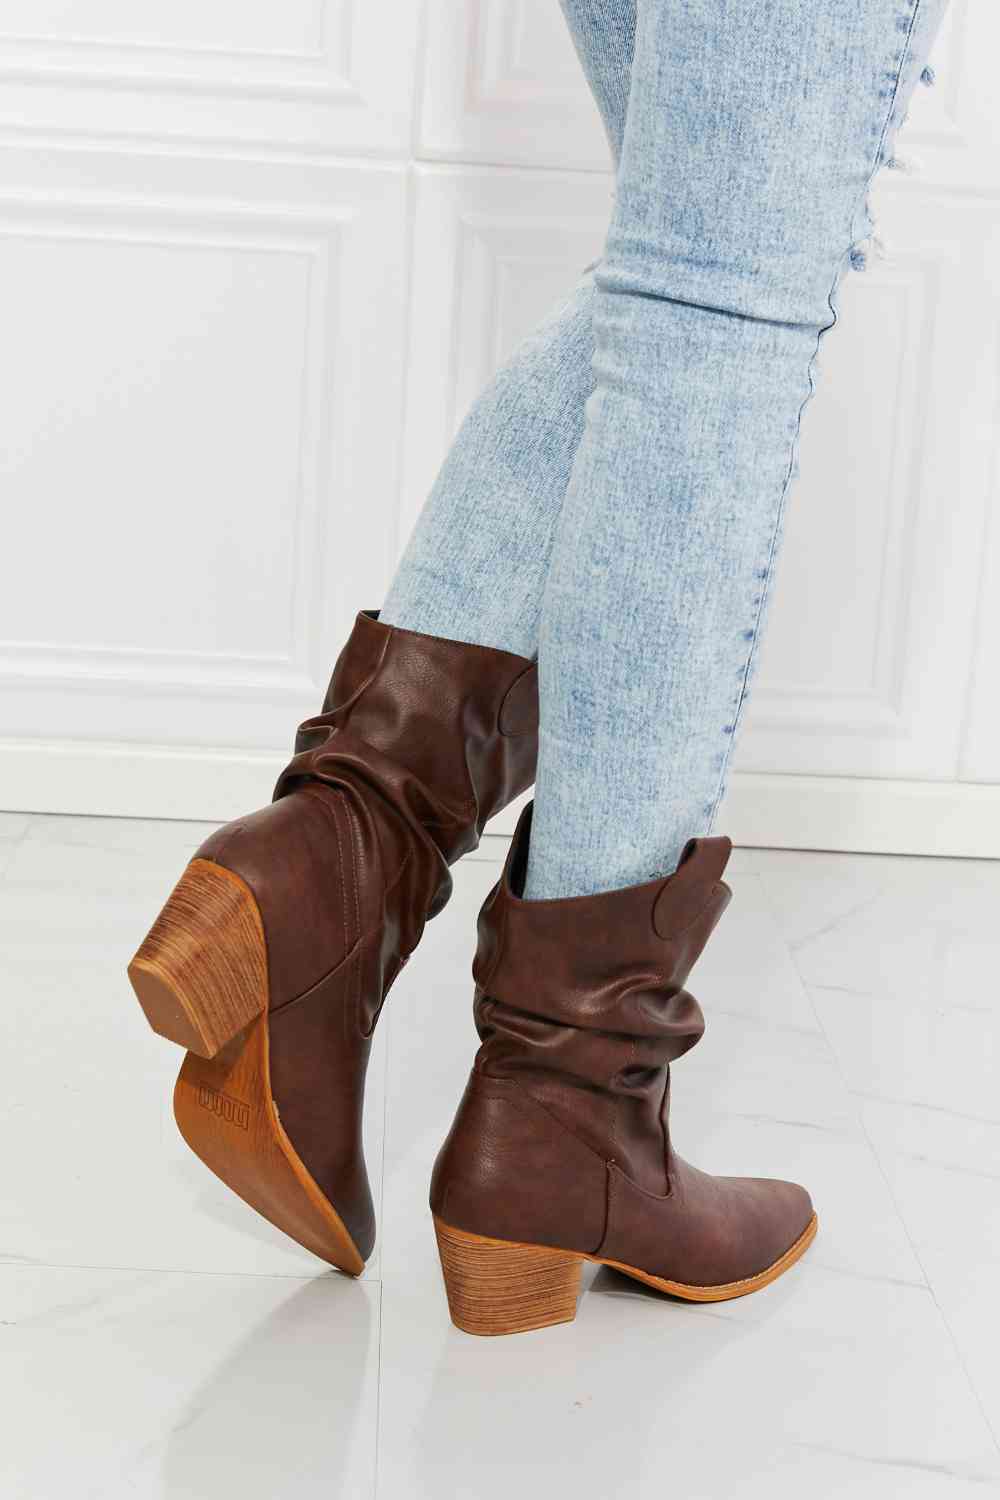 MMShoes Better in Texas Scrunch Cowboy Boots in Brown - Alonna's Legging Land